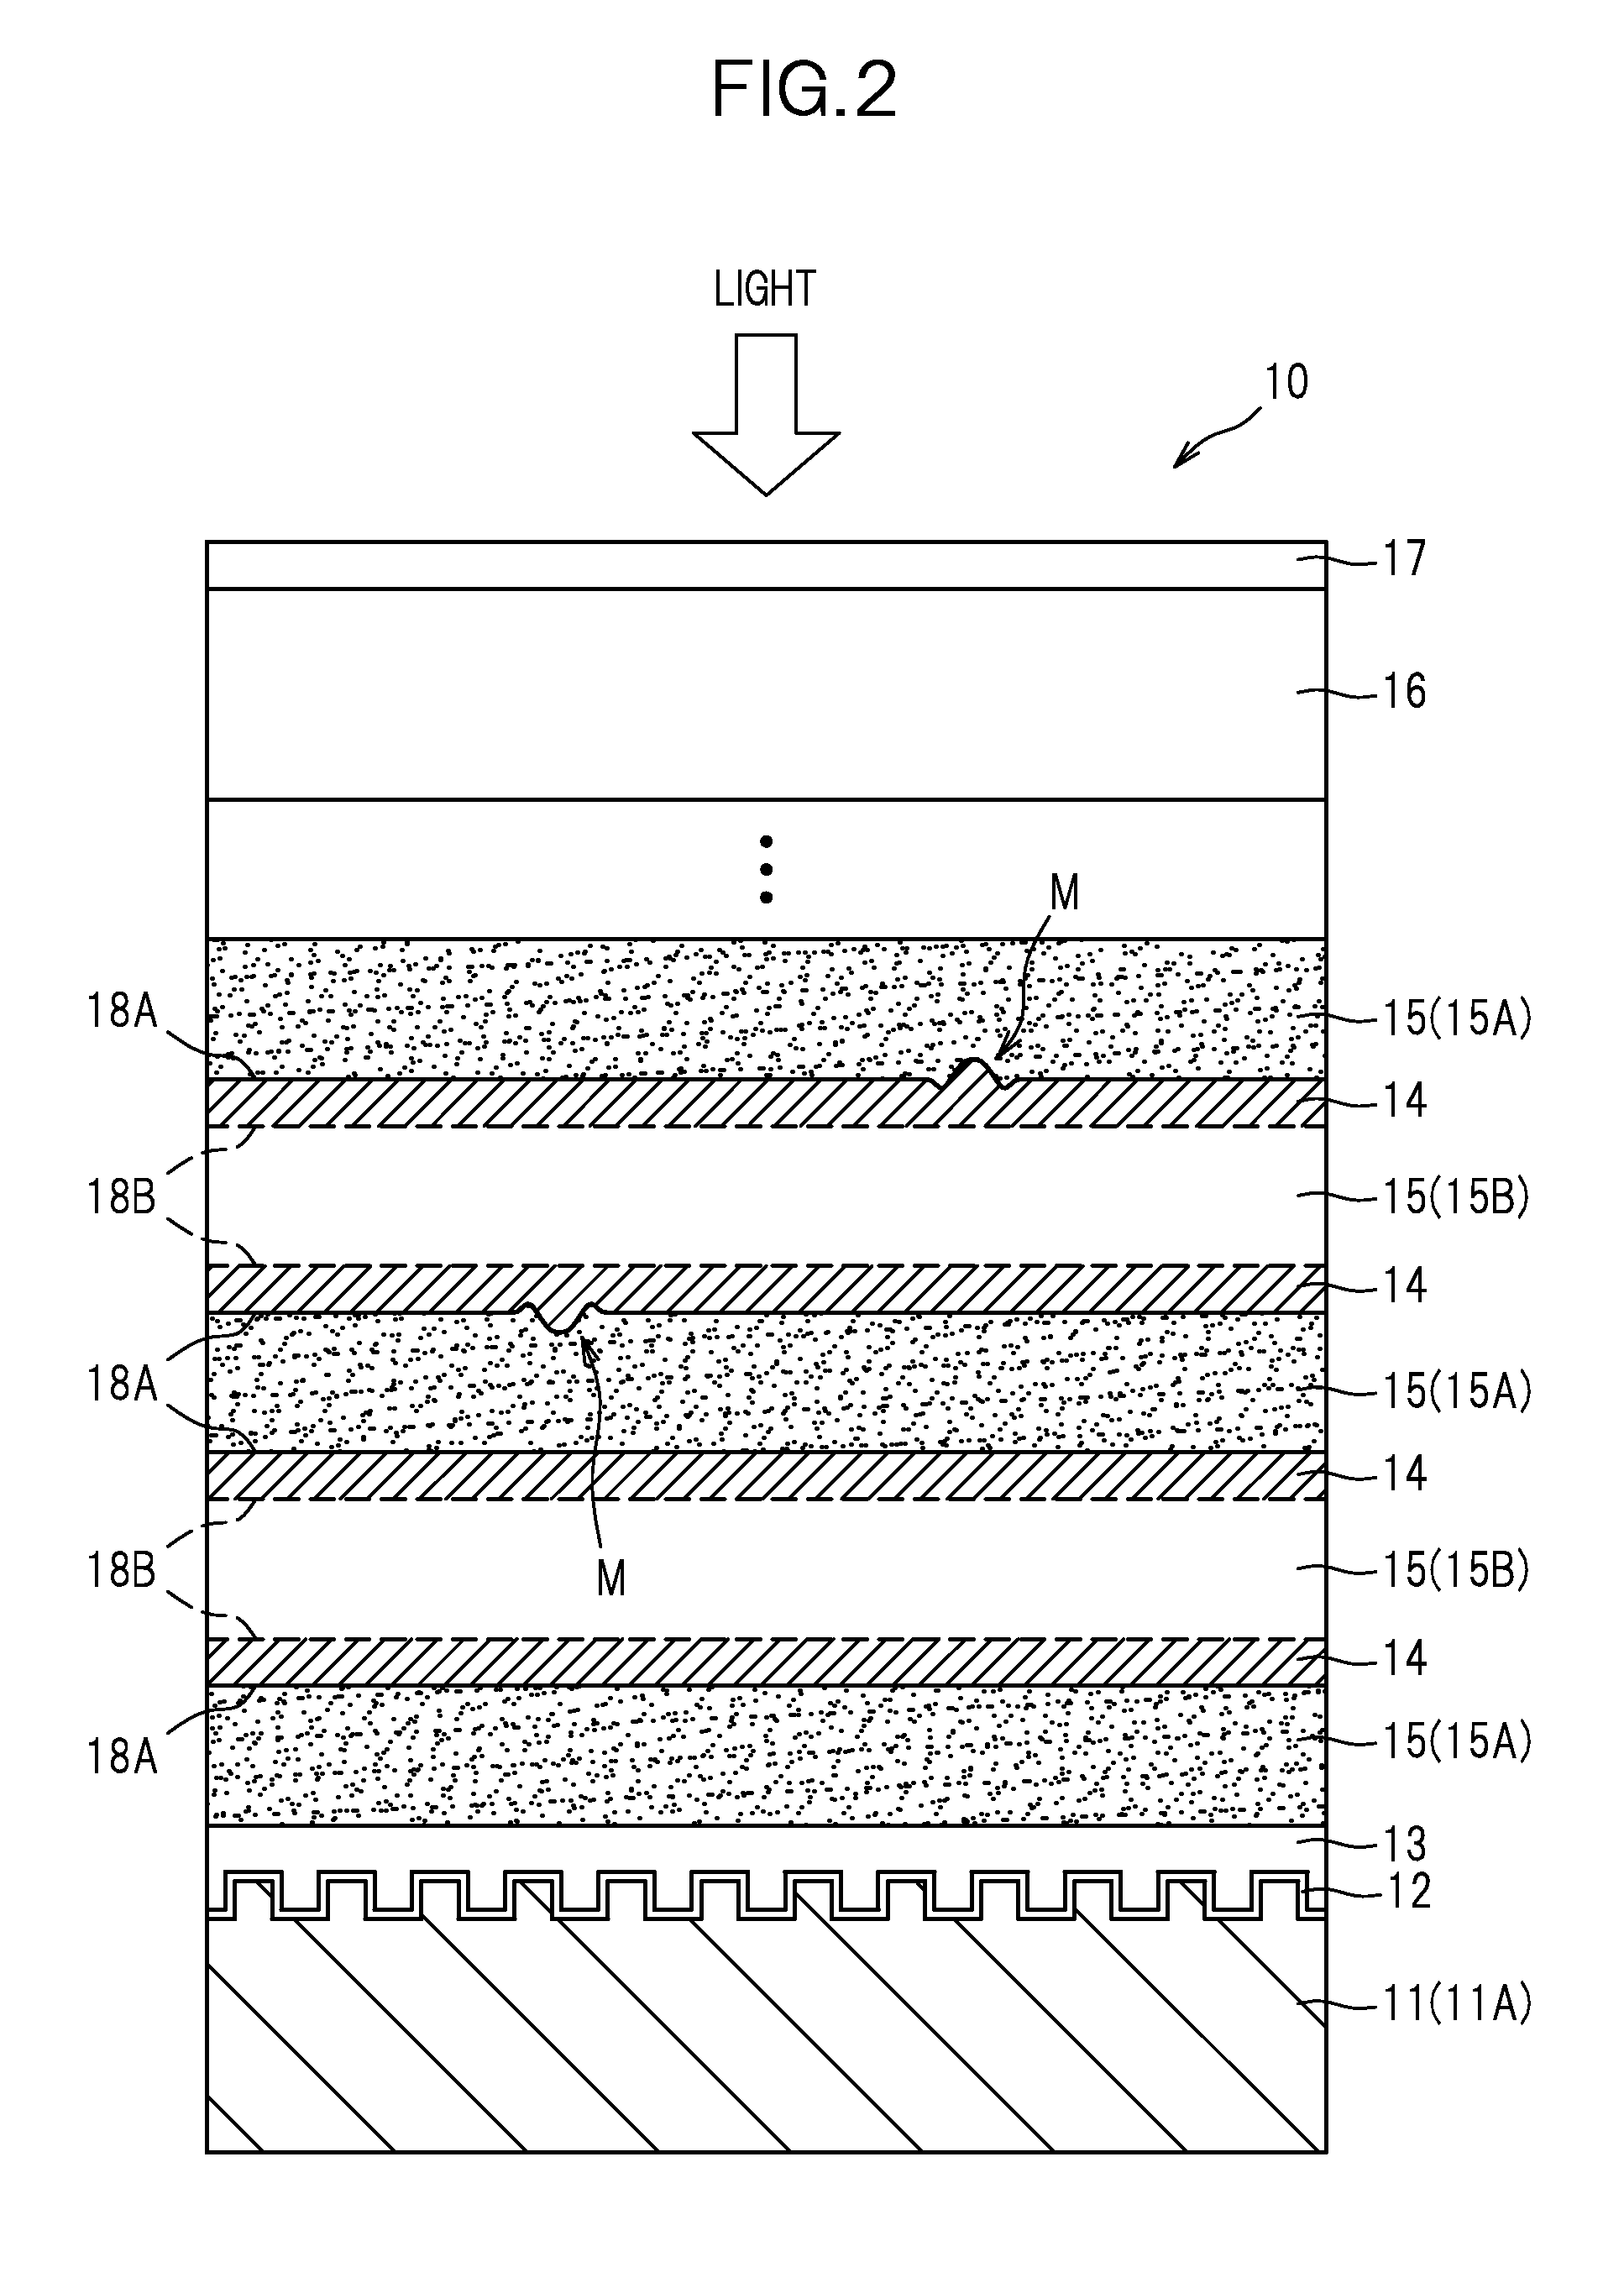 Optical information recording medium and method for manufacturing same